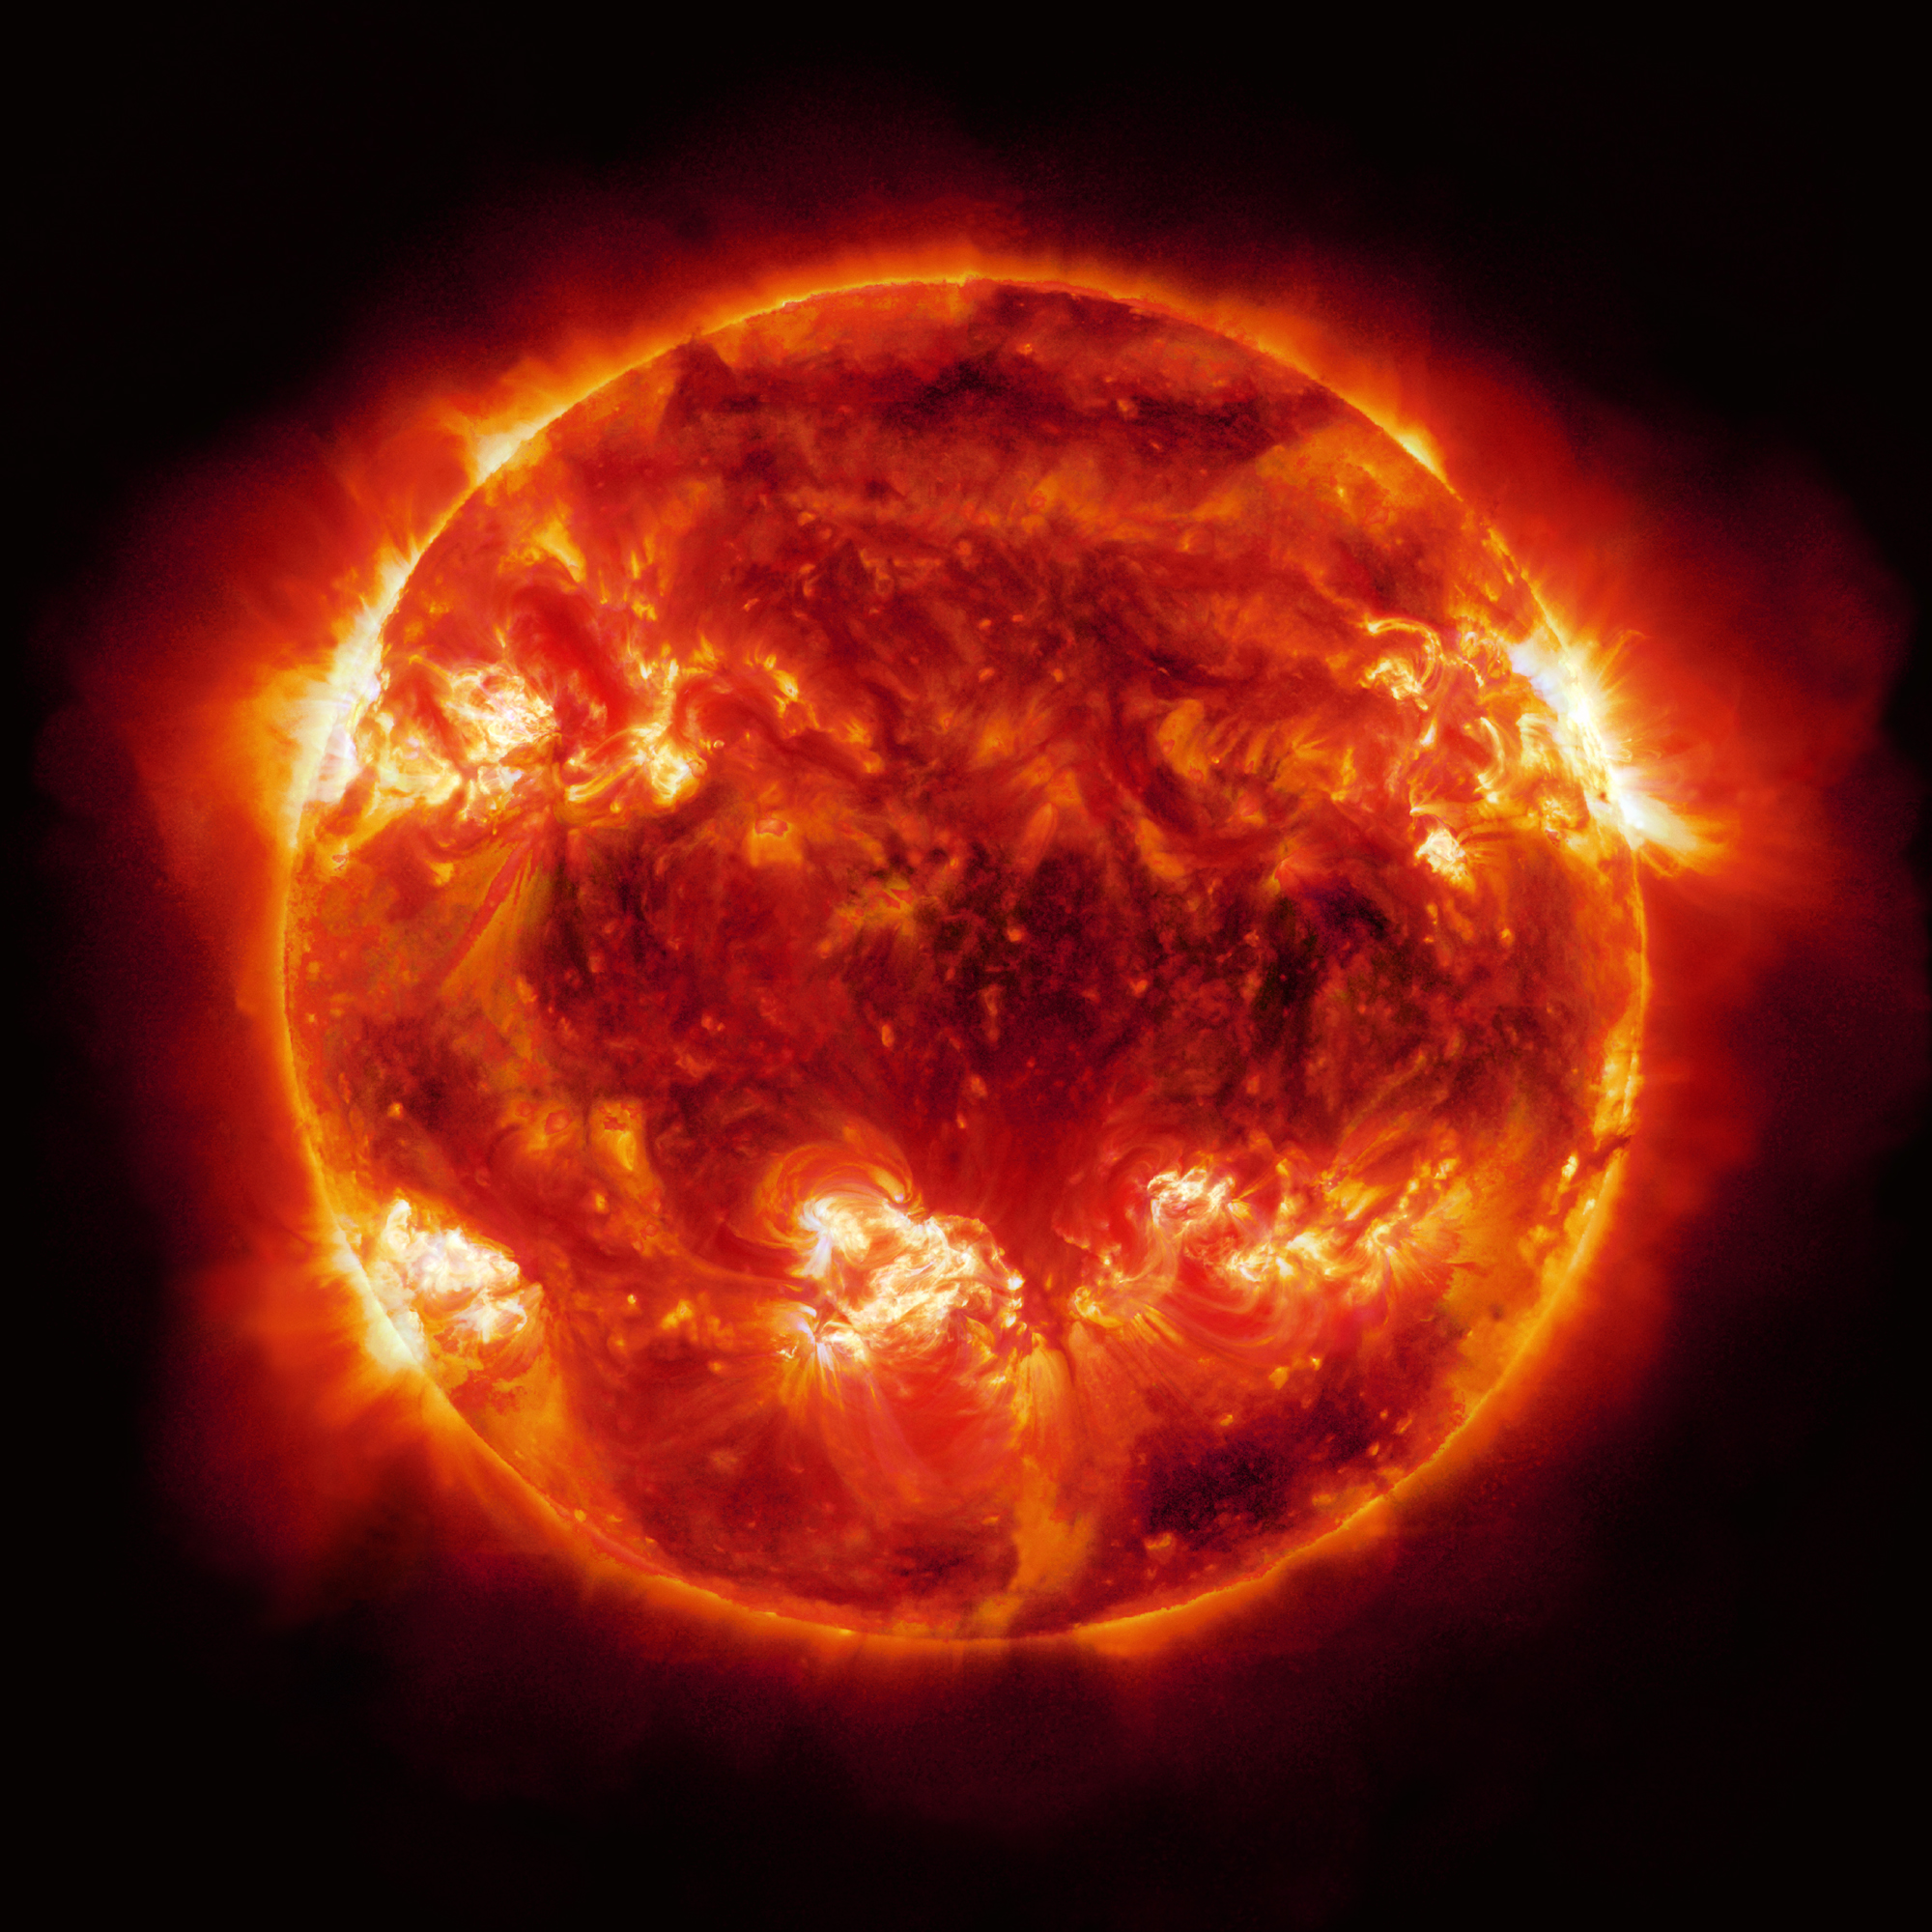 Animated Images Of The Sun - HD Photos Gallery